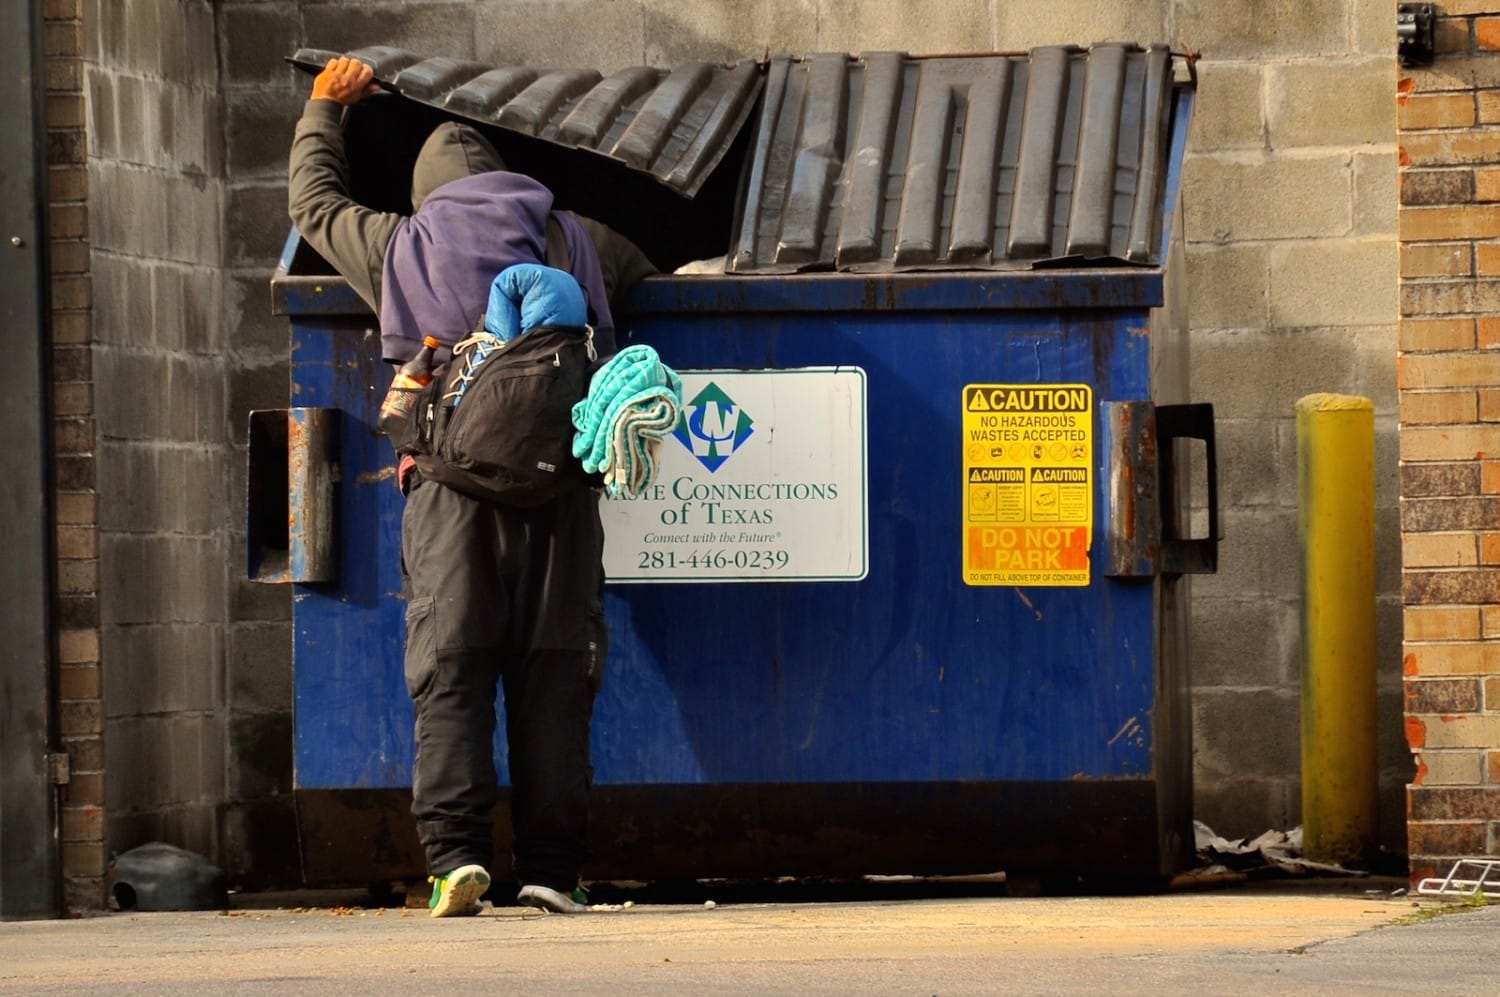 Is It Illegal to Dumpster Dive in Arkansas? Here’s What the Law Says